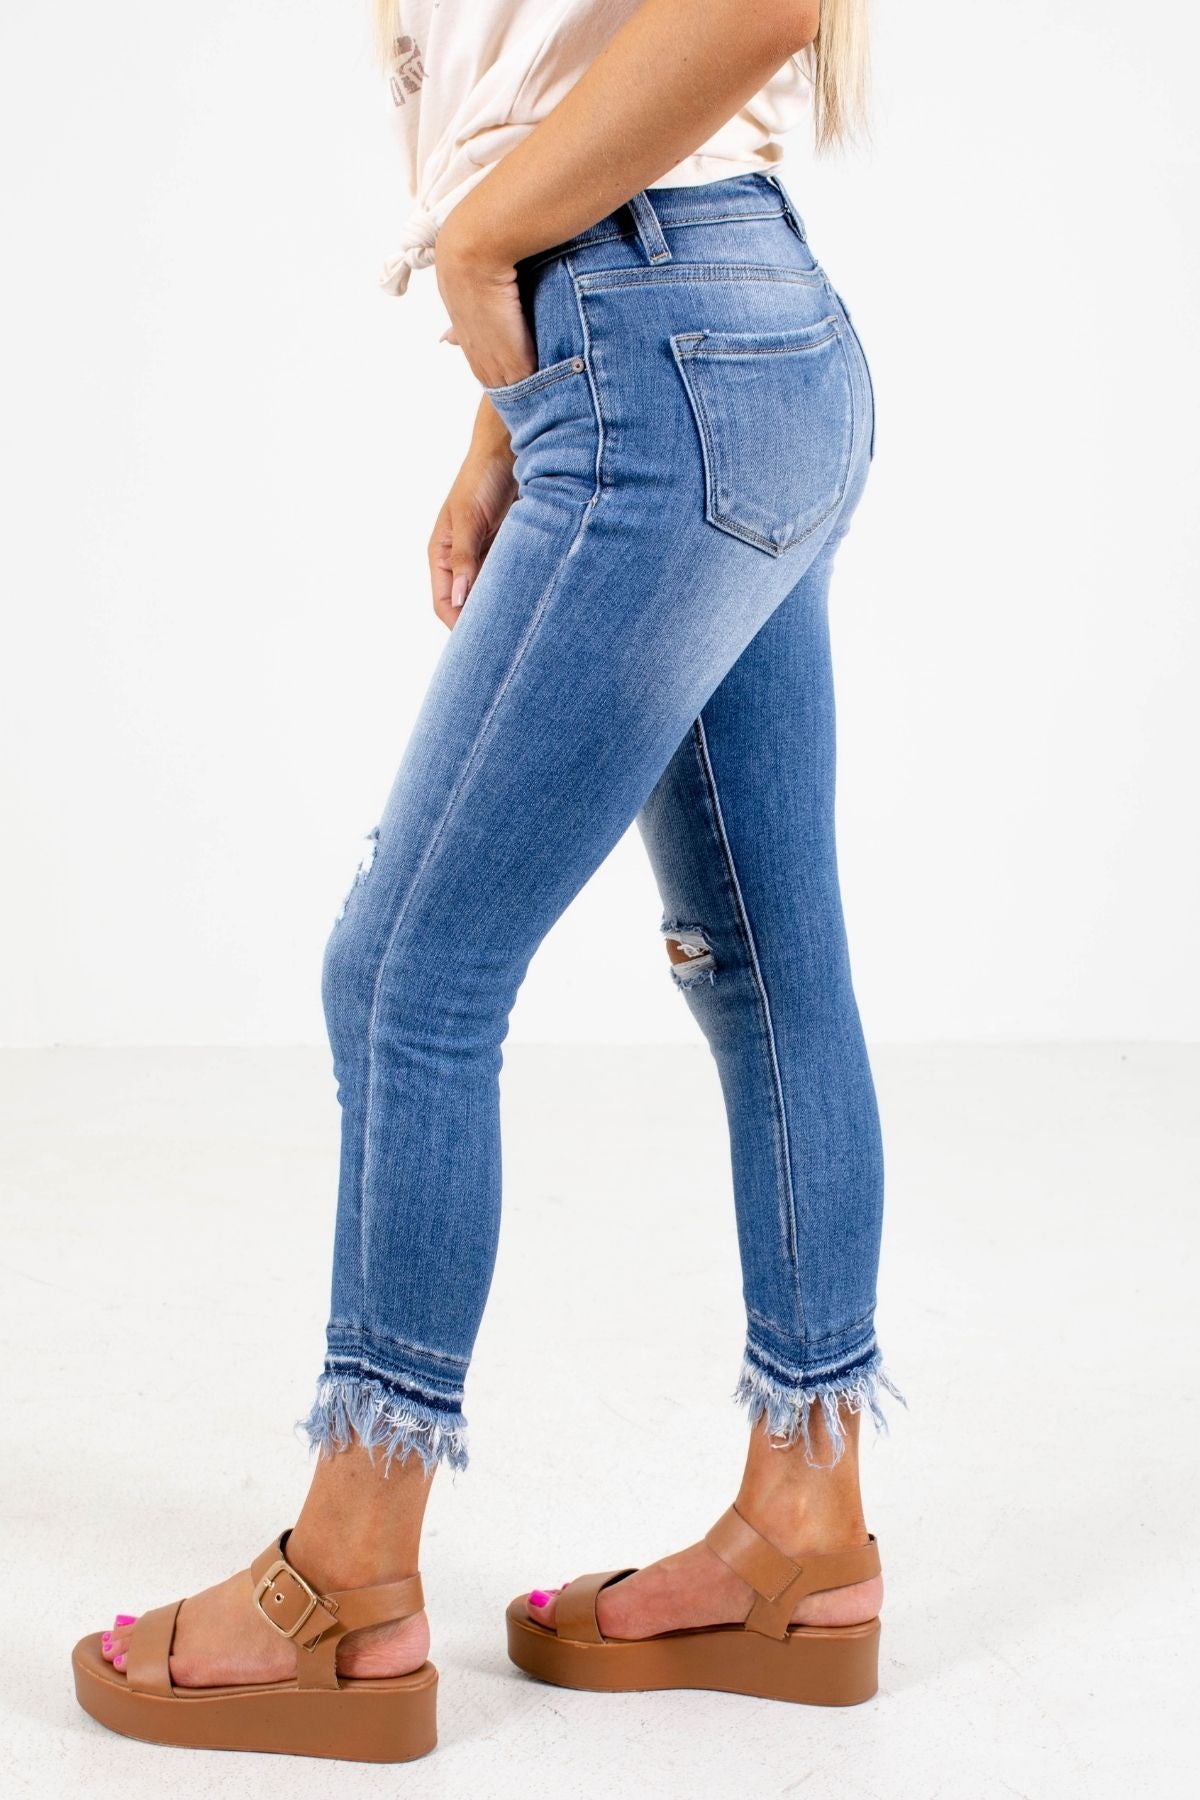 Cute and Comfortable Boutique KanCan Brand Jeans for Women